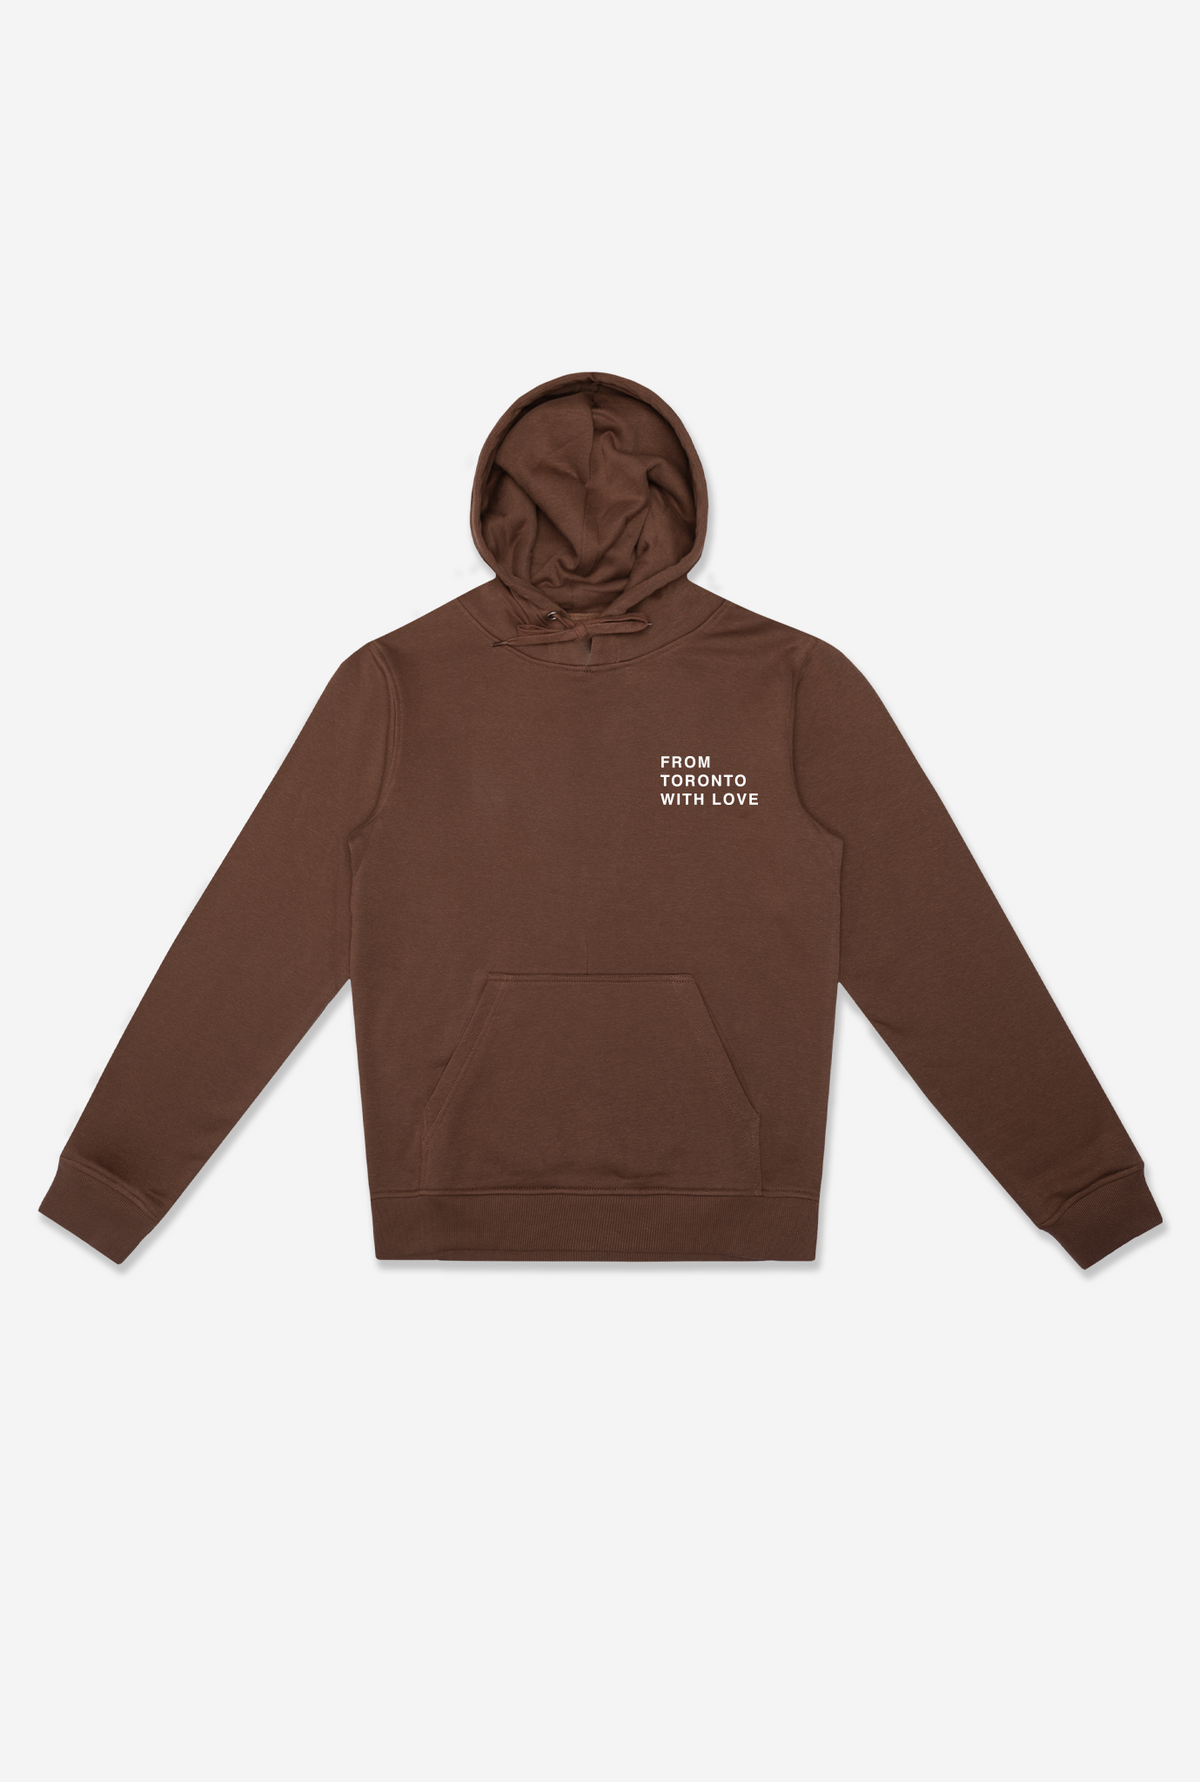 From Toronto with Love Crescent Hoodie - Espresso